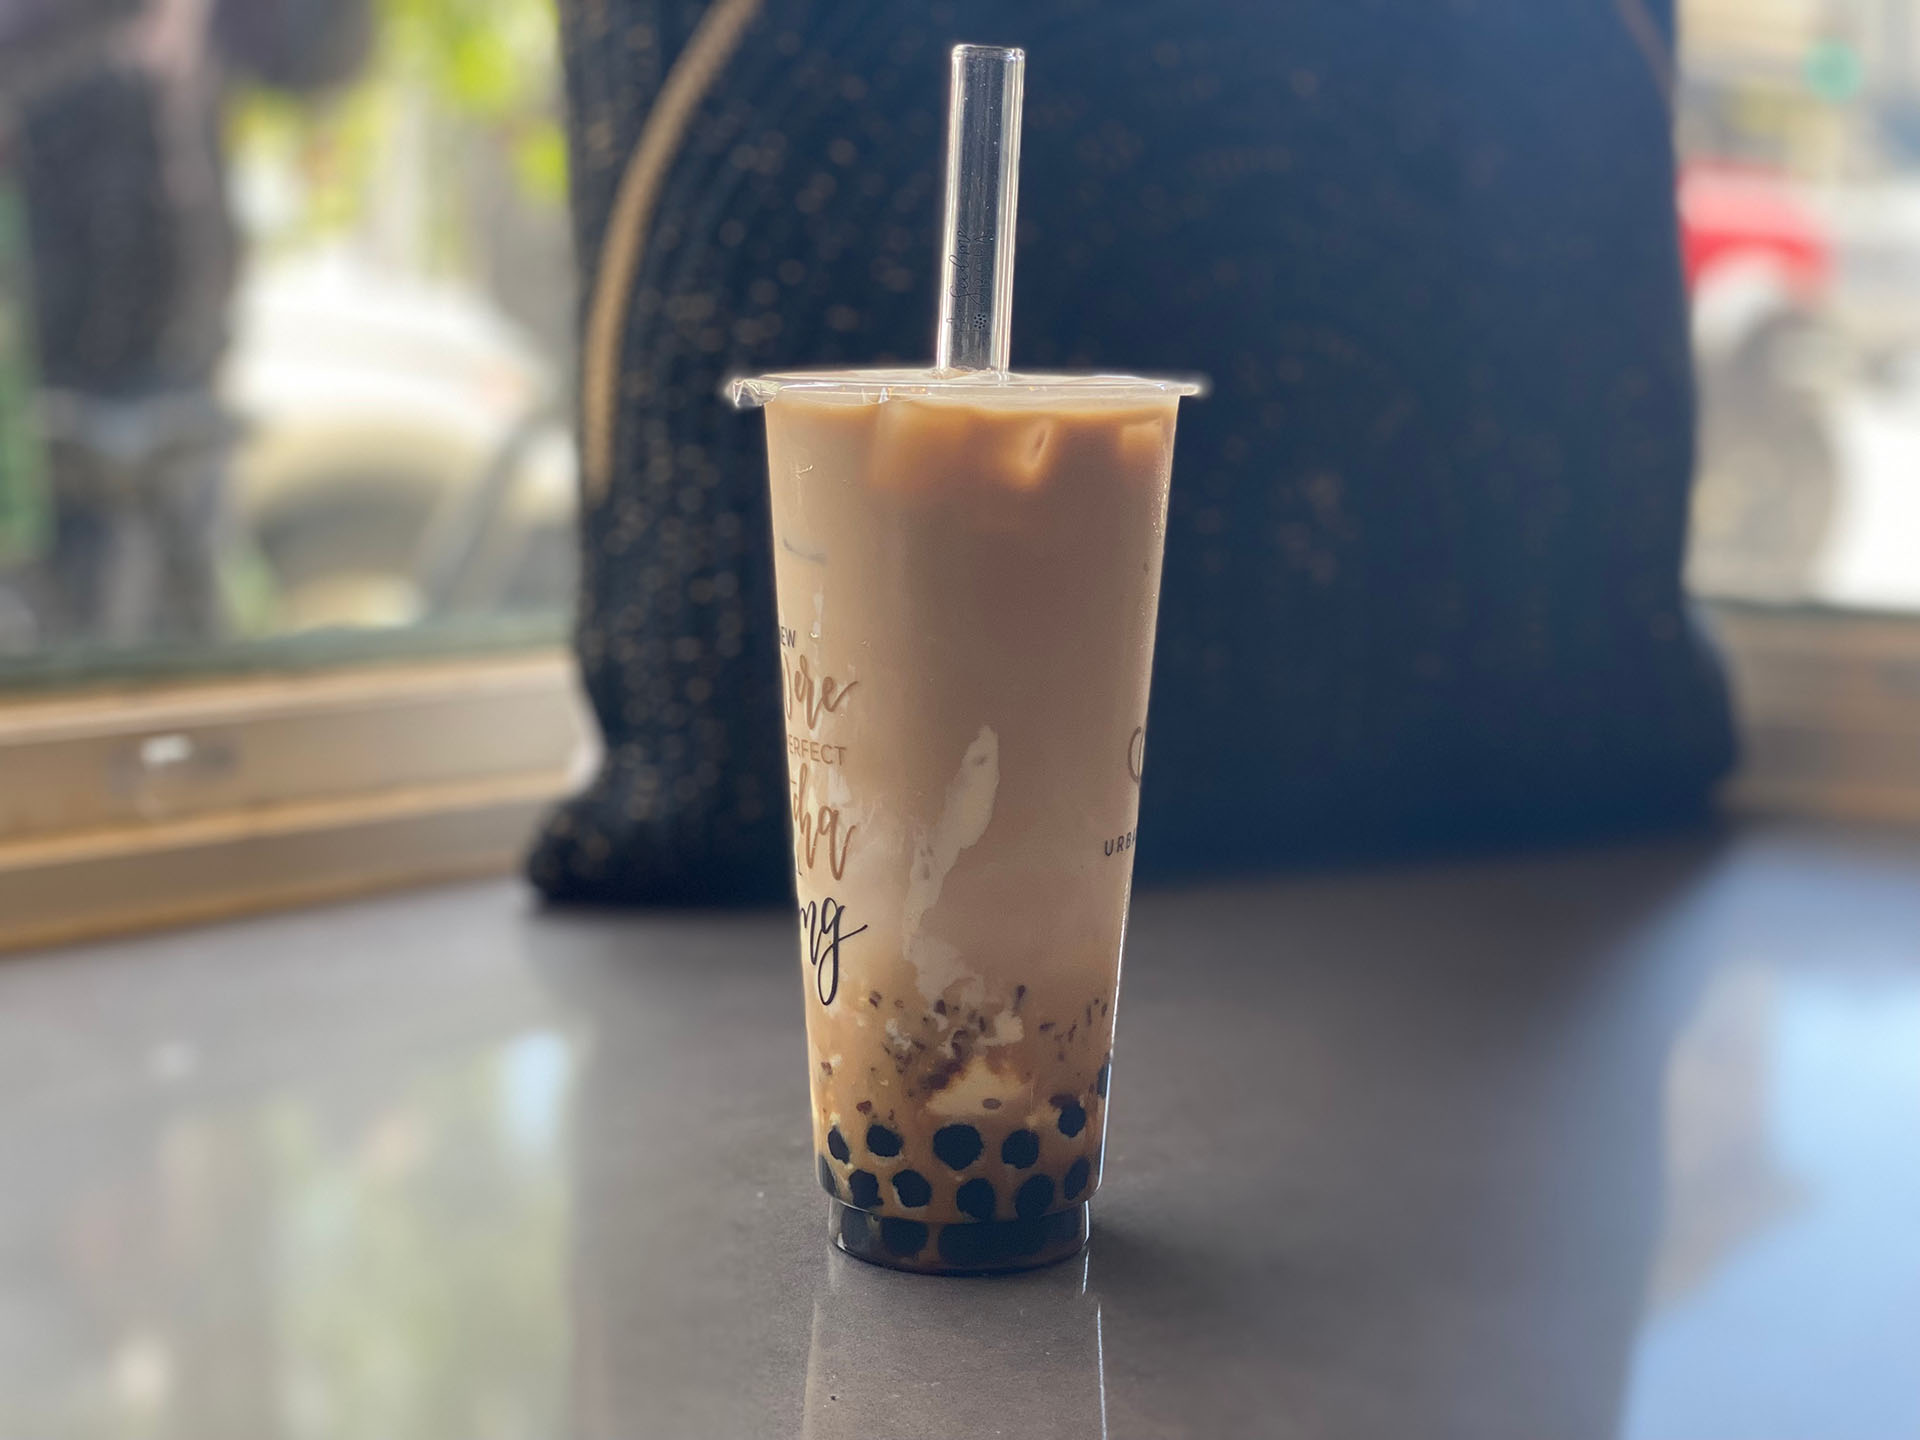 A creamy boba drink sits on a table in front of a pillow.